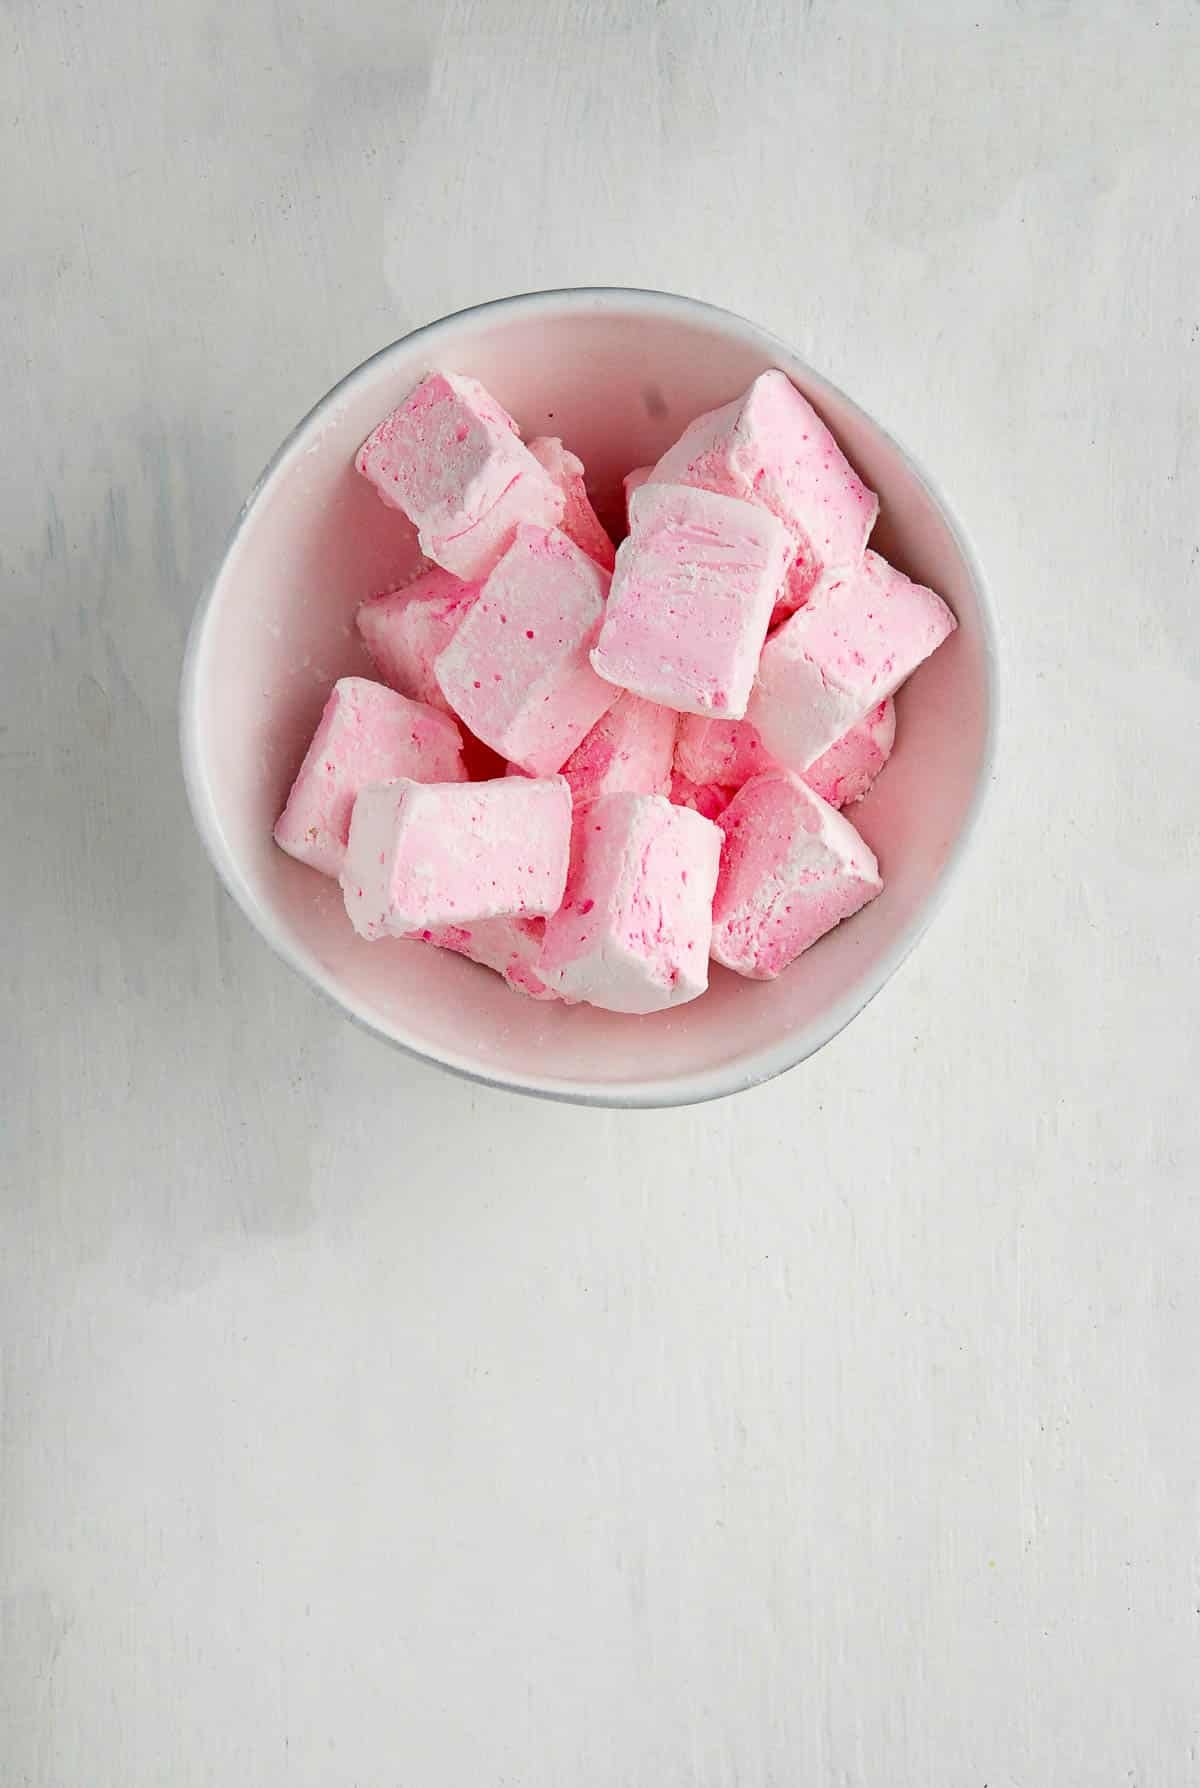 rose flavored homemade marshmallows in blue bowl.